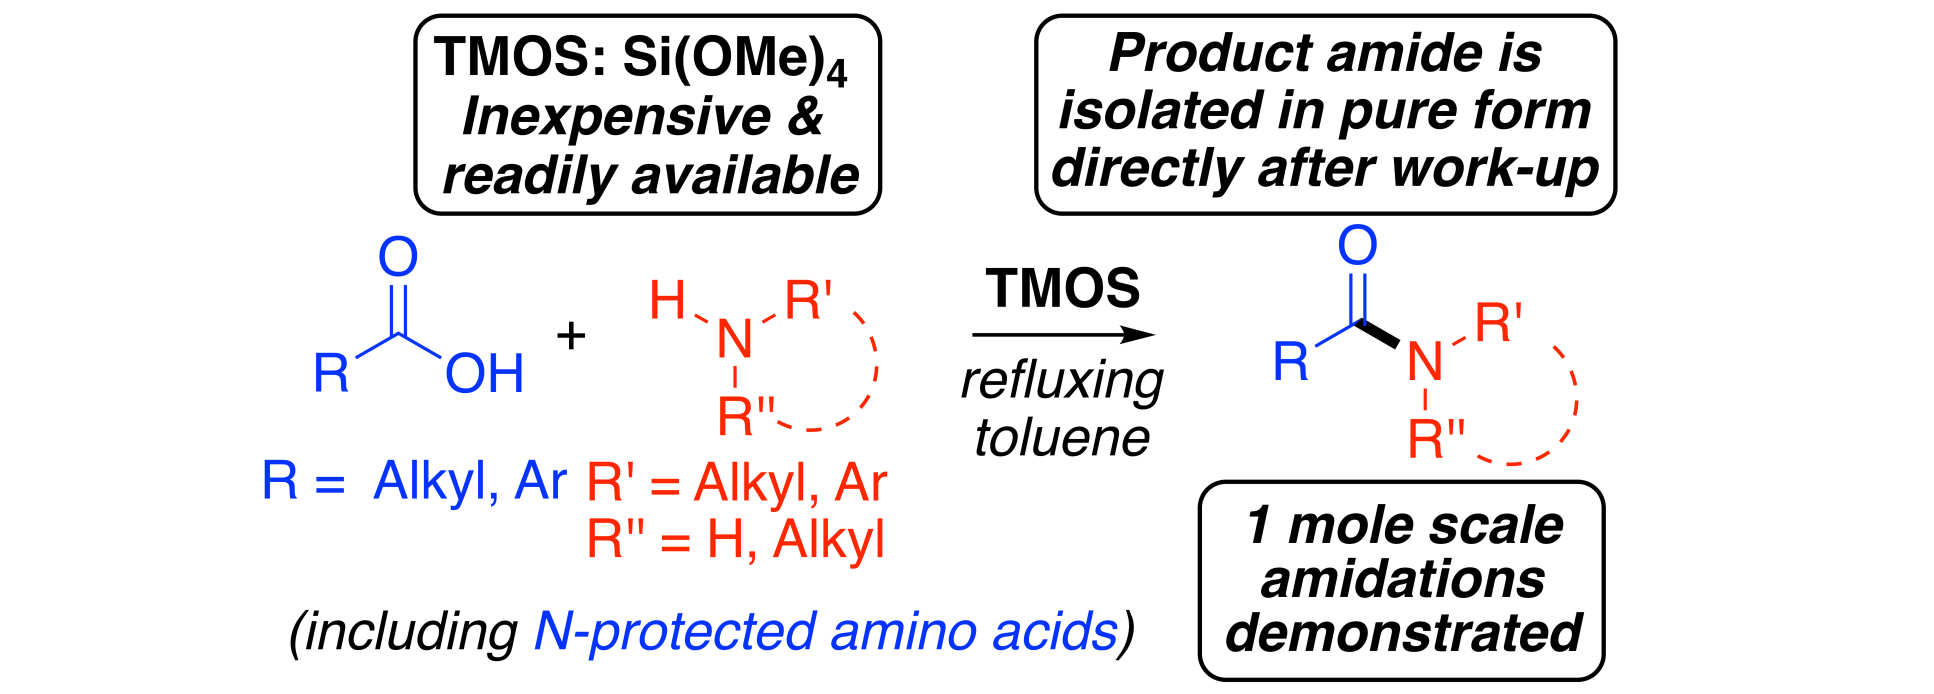 Summary scheme for paper: Tetramethyl Orthosilicate (TMOS) as a Reagent for Direct Amidation of Carboxylic Acids